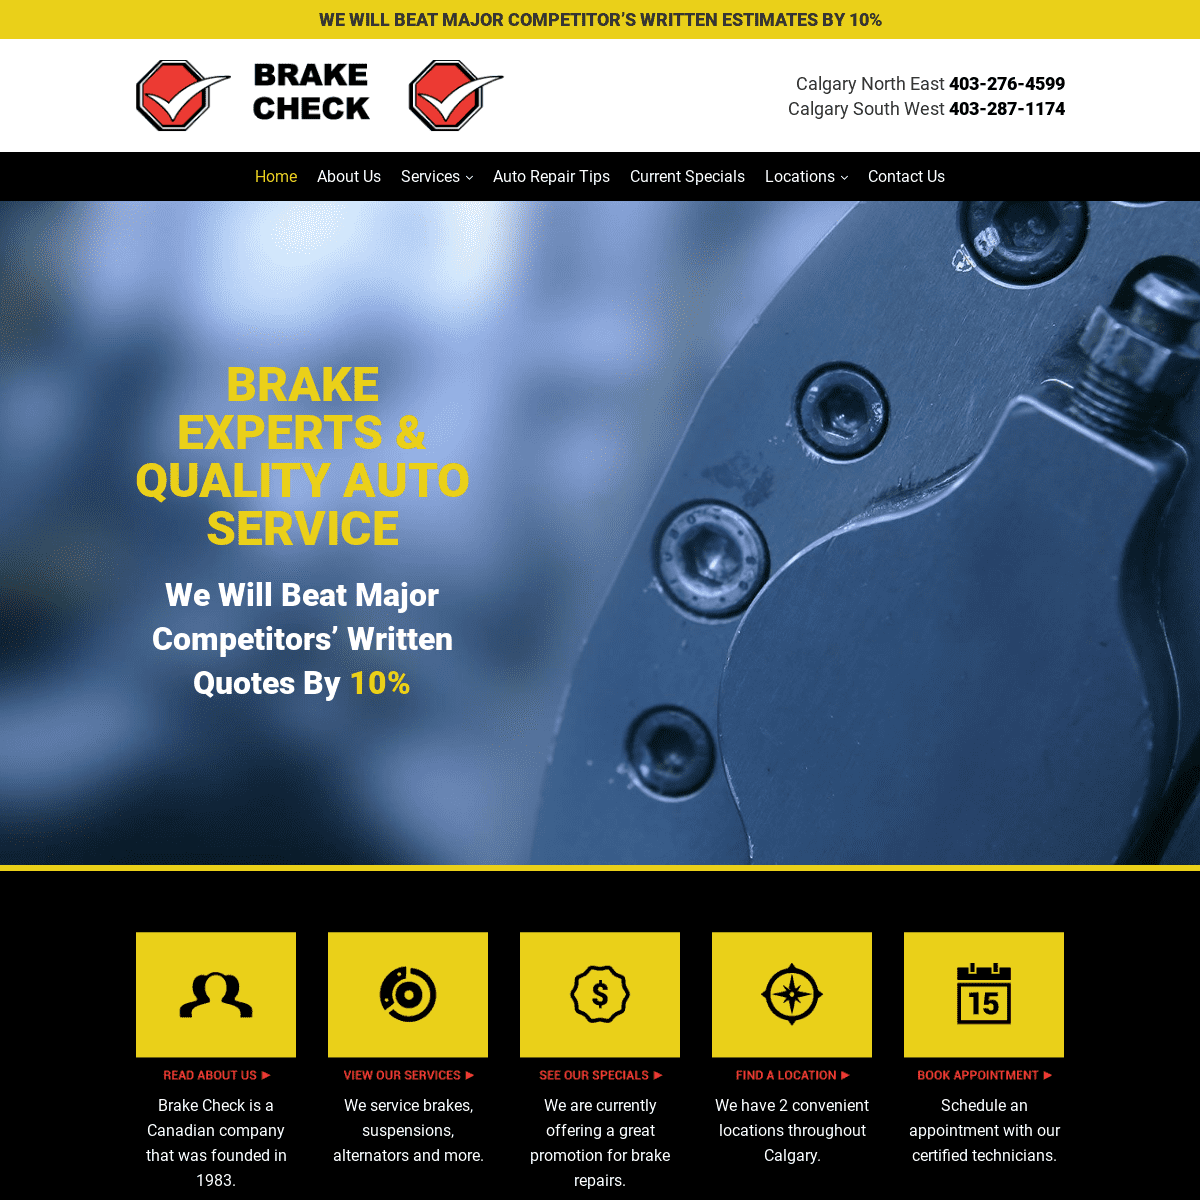 A complete backup of brakecheck.ca